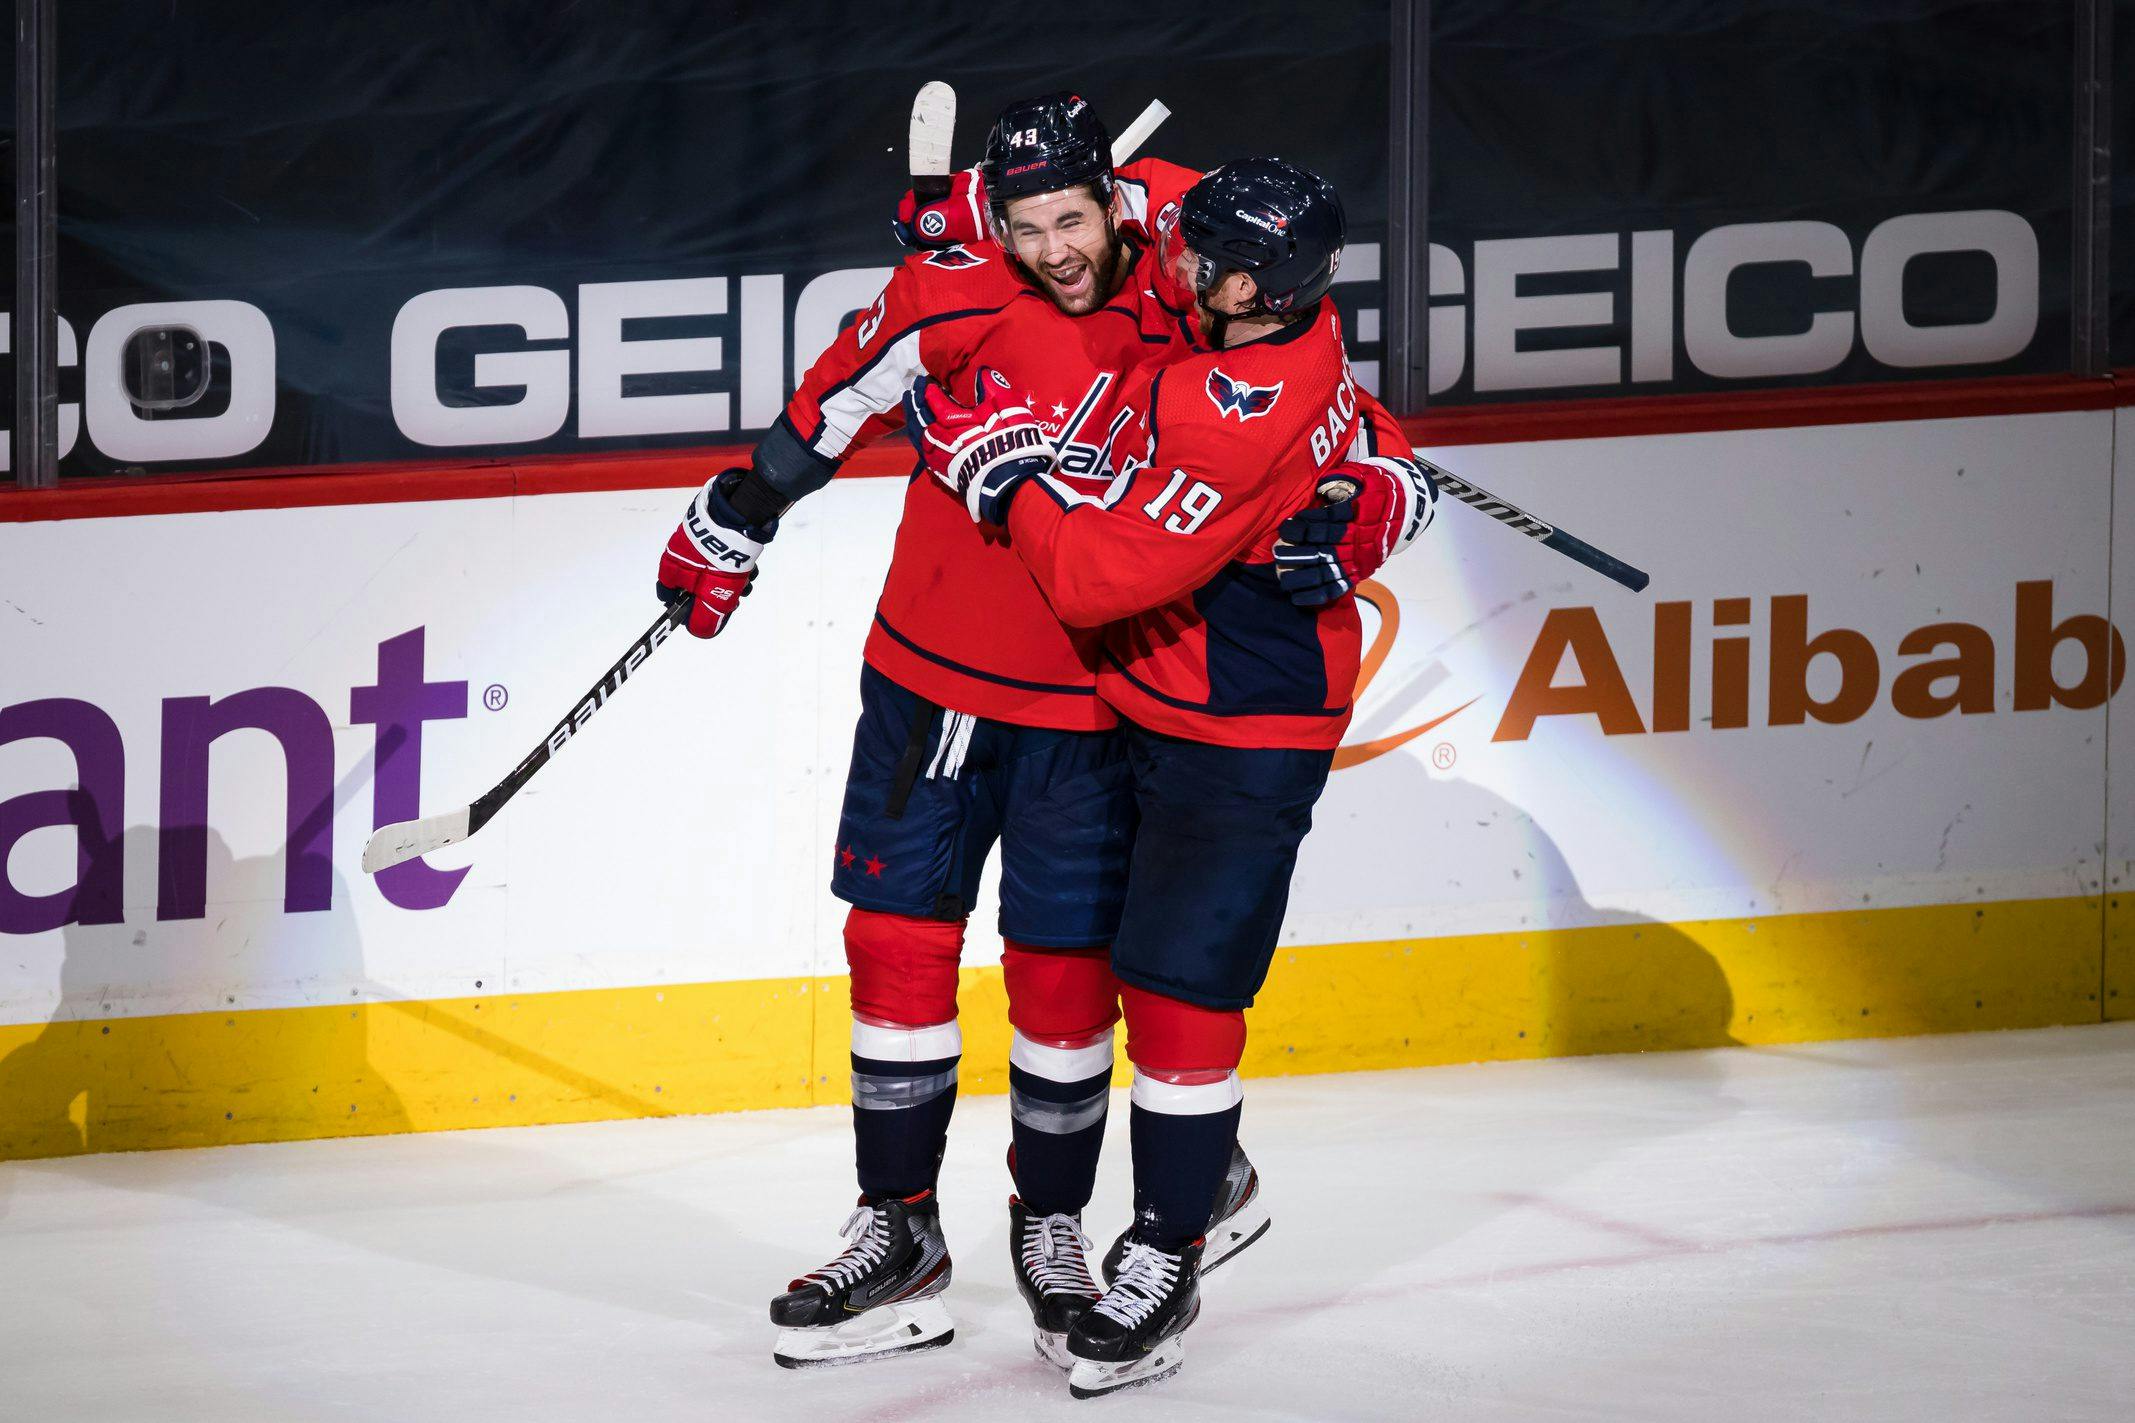 Capitals forwards Nicklas Backstrom and Tom Wilson set to return from injury